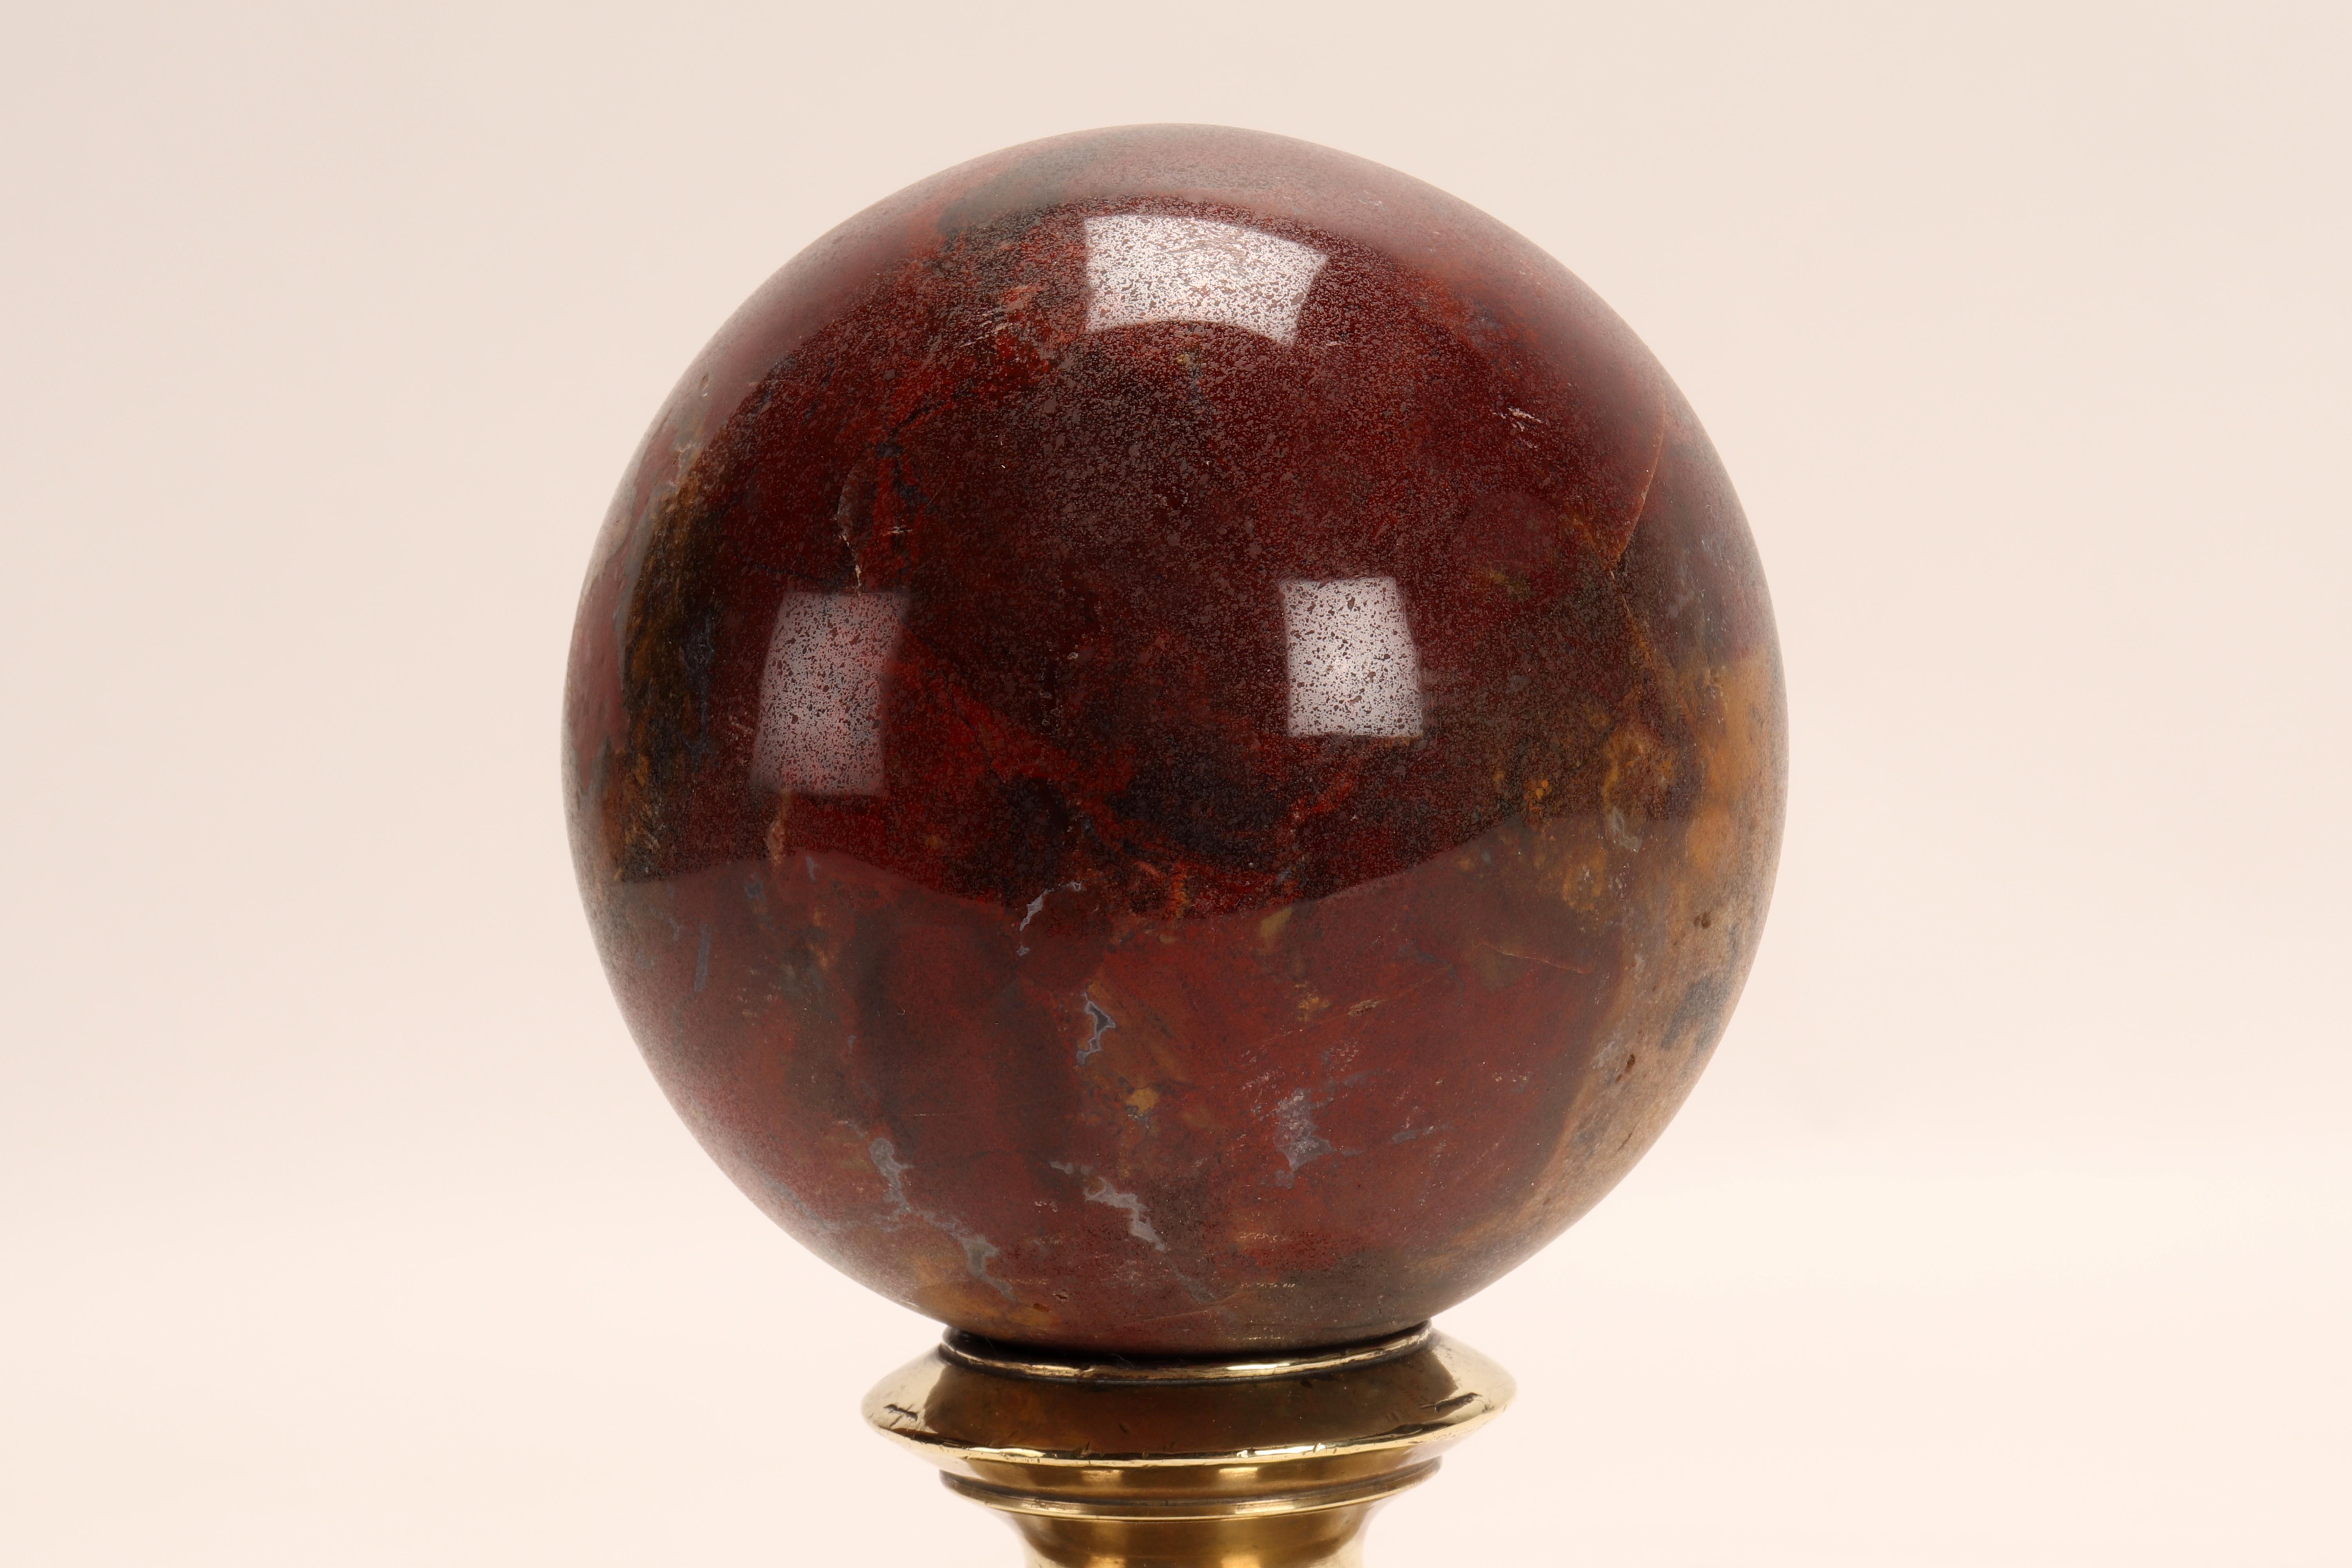 A sphere of red jasper resting on a base, made of brass that has a vase-shaped support with a wavy profile that opens upwards with a concave top. Italy circa 1870.